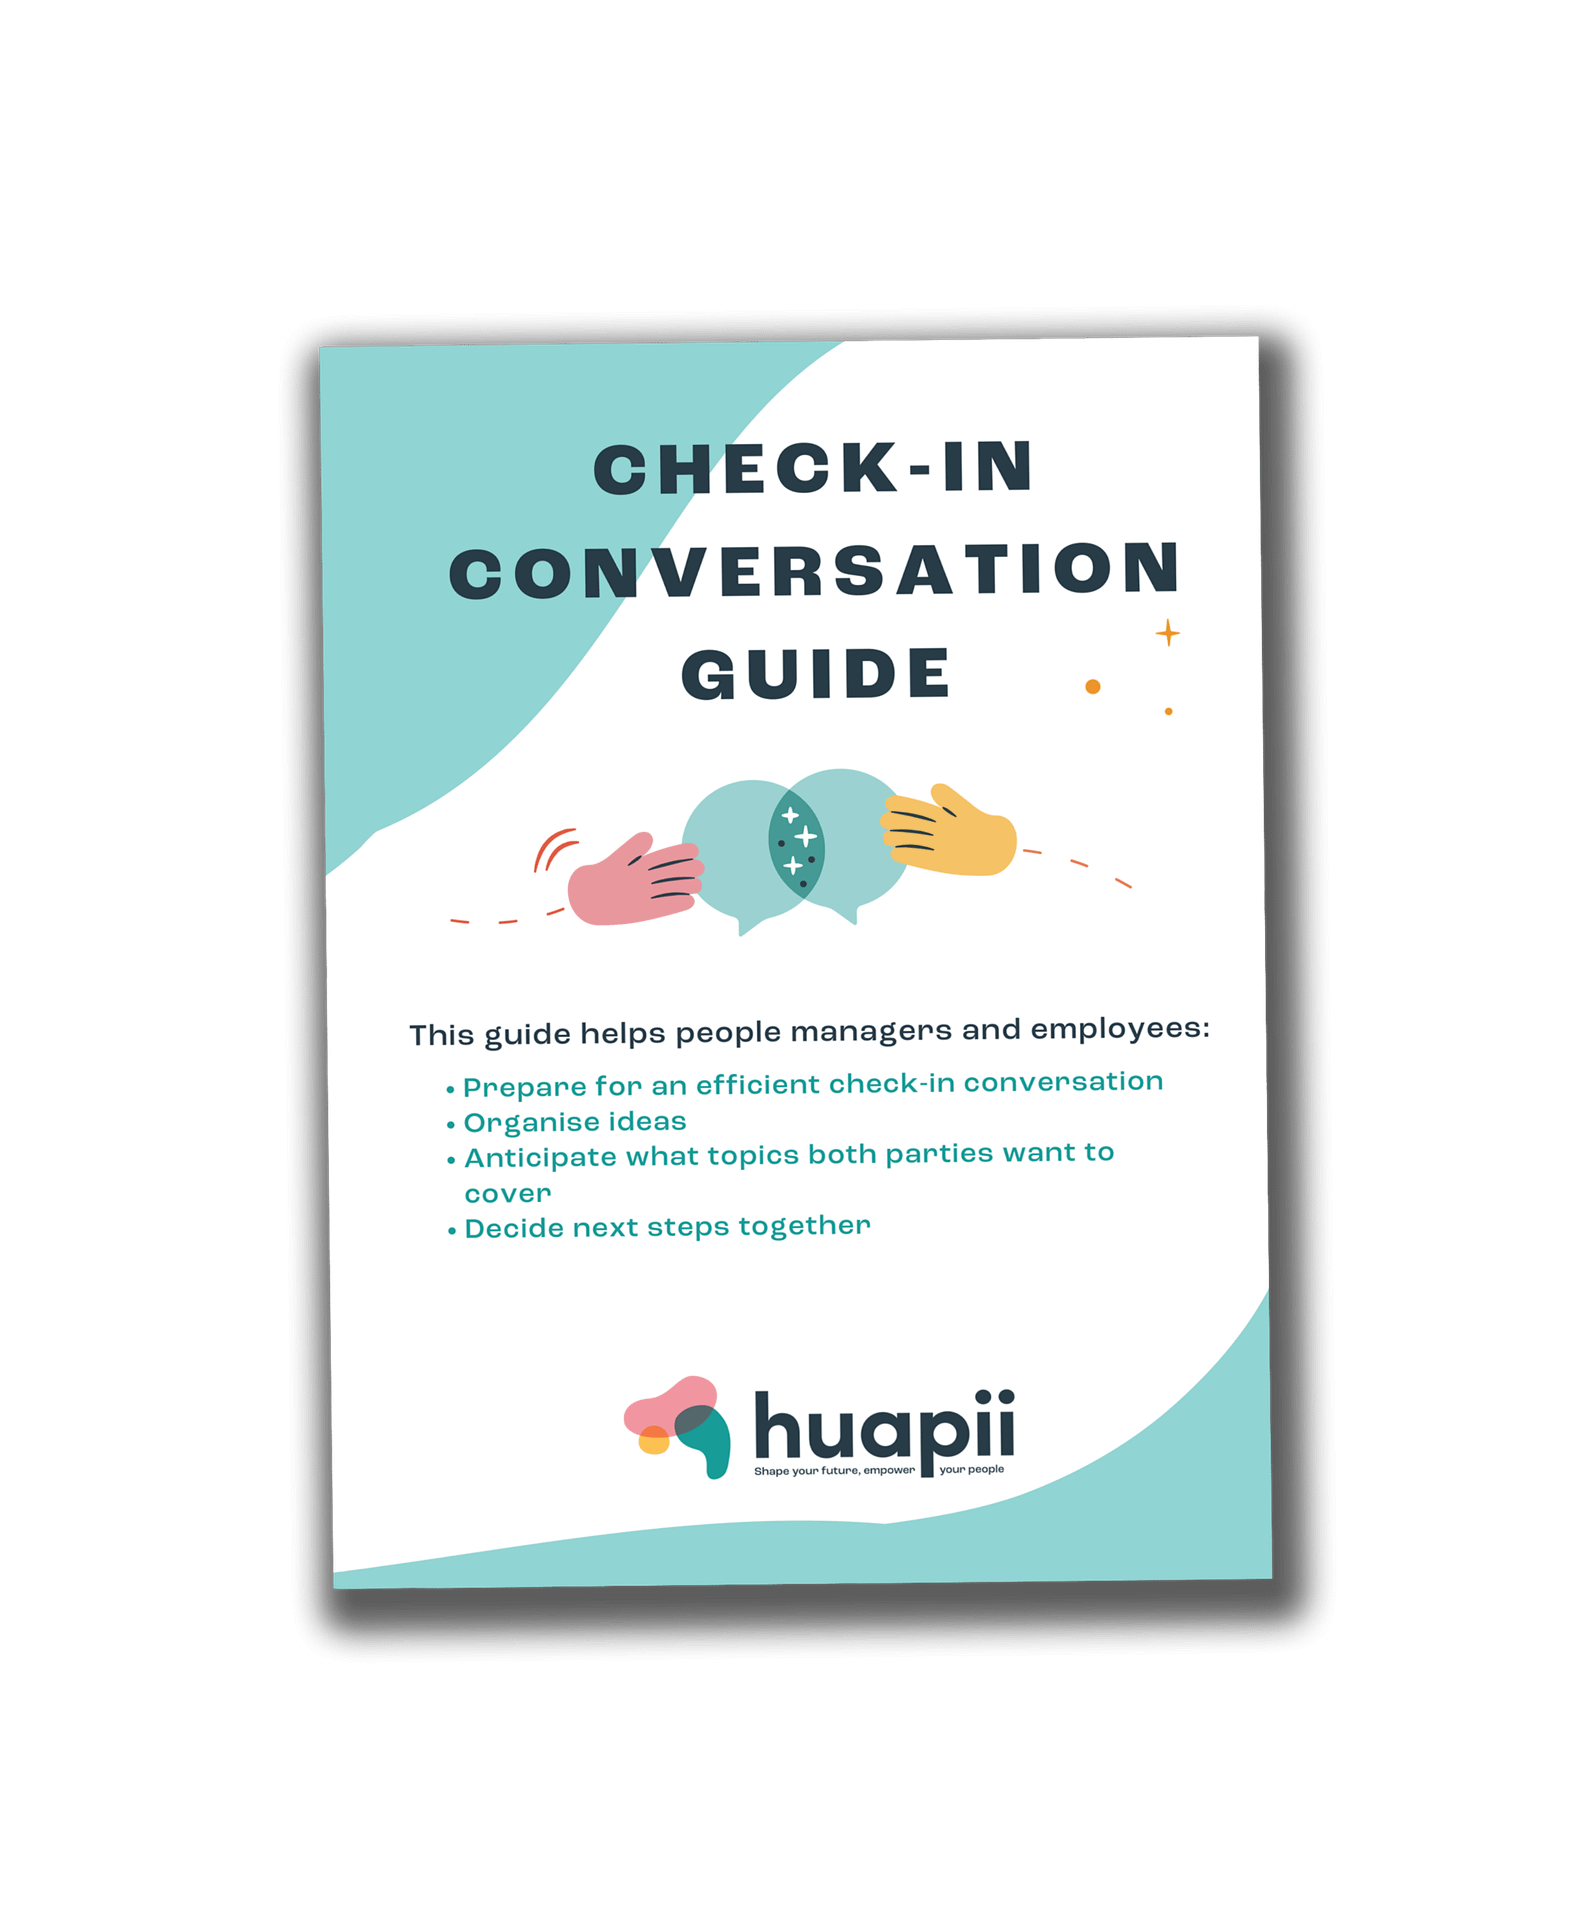 Check-in Conversation Guide_huapii